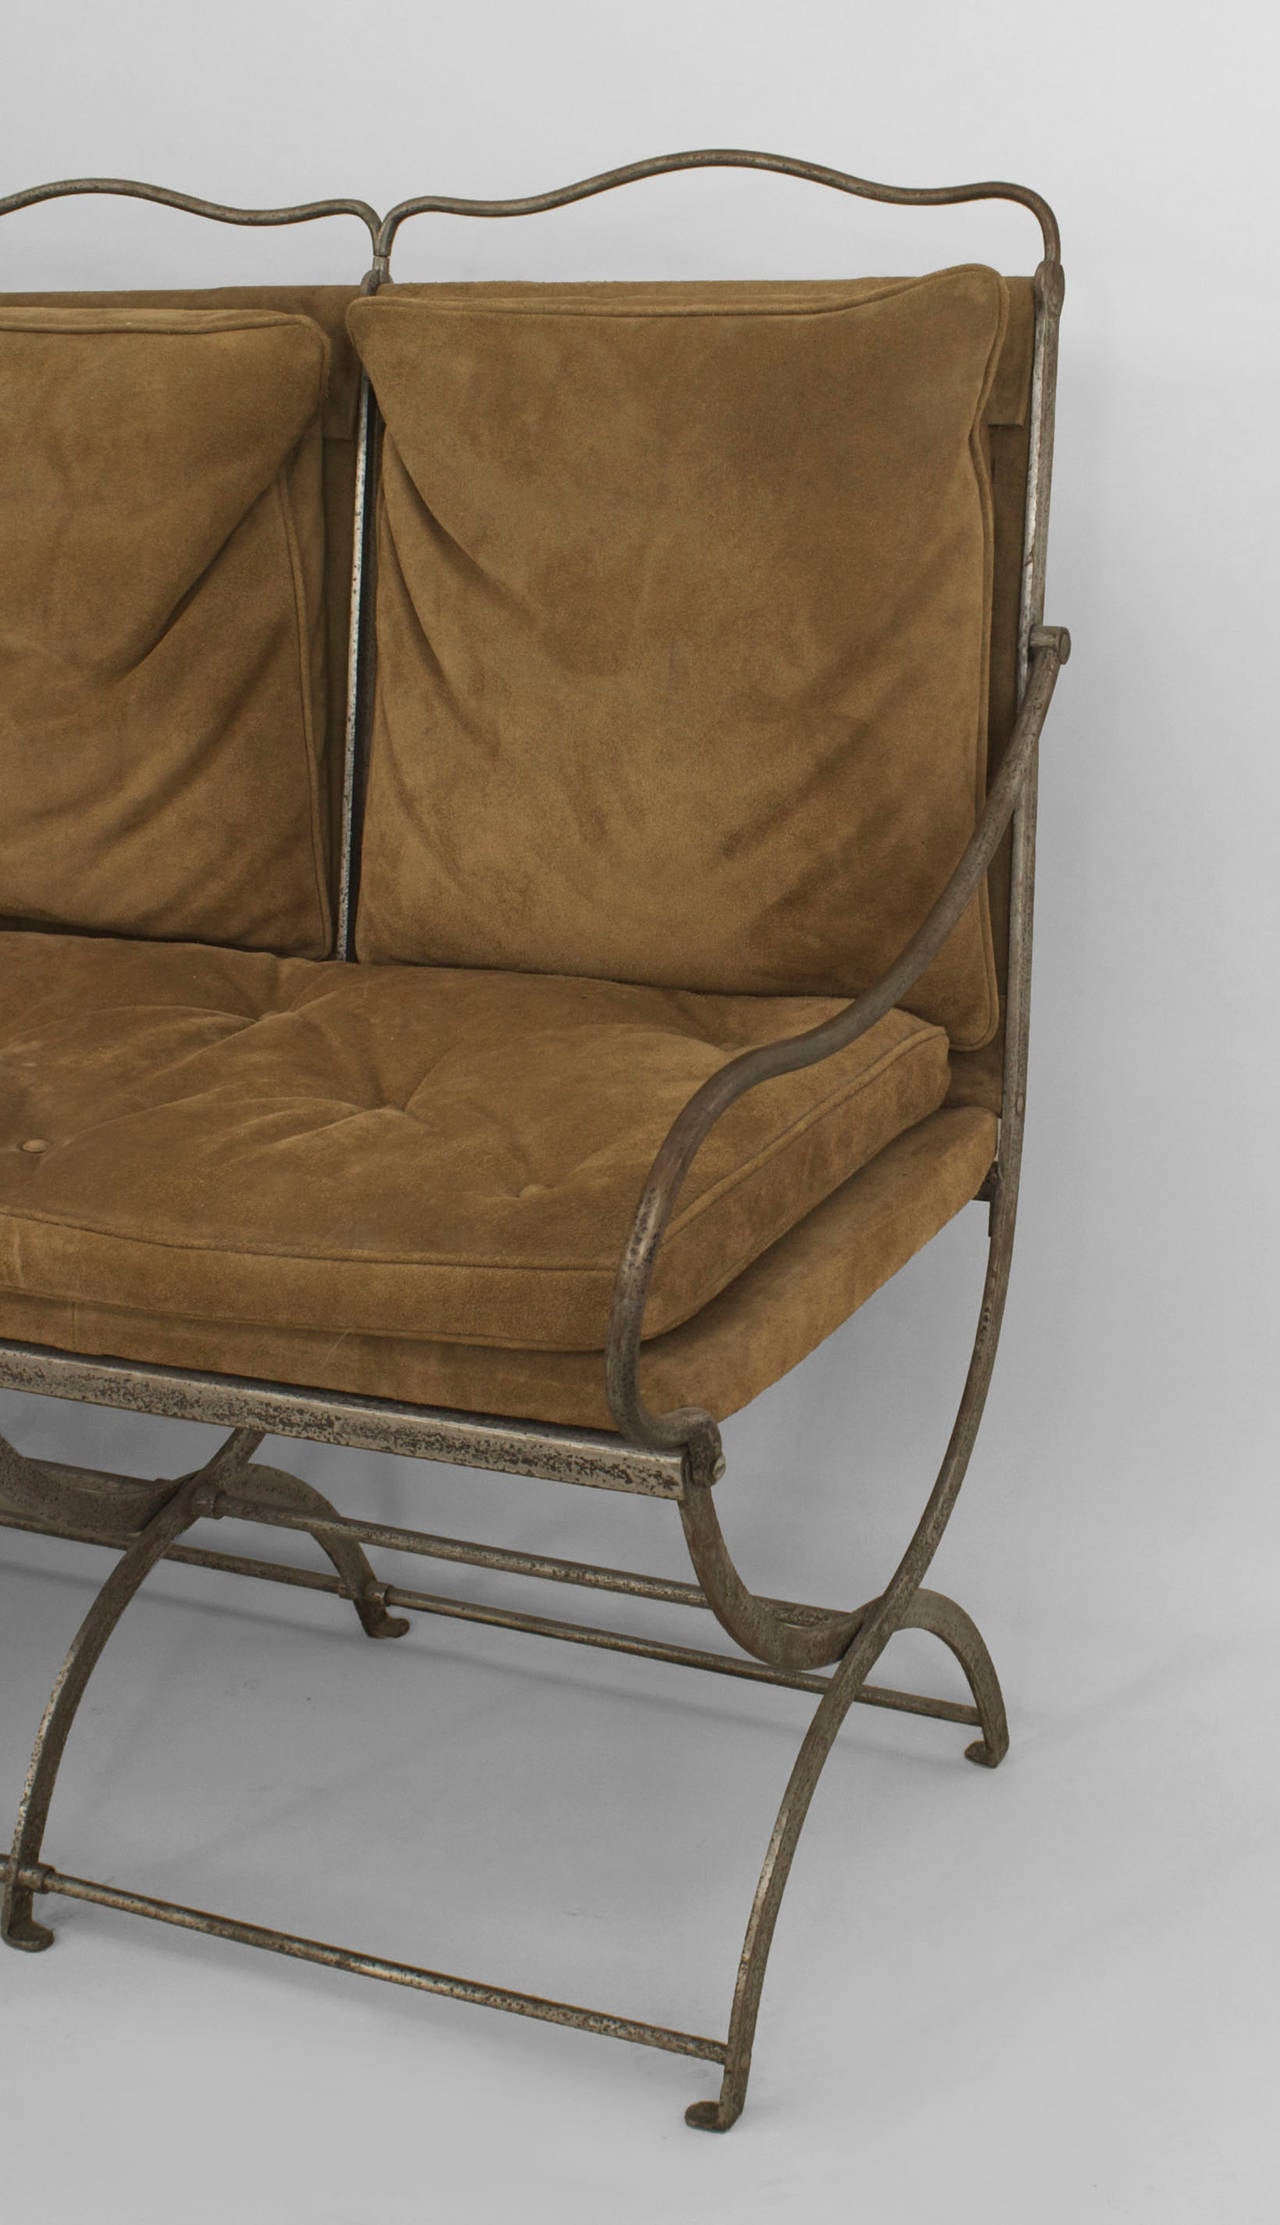 French 1940s steel settee with a four seat-back design and low scroll arms with
suede upholstered seat cushion and four back cushions.